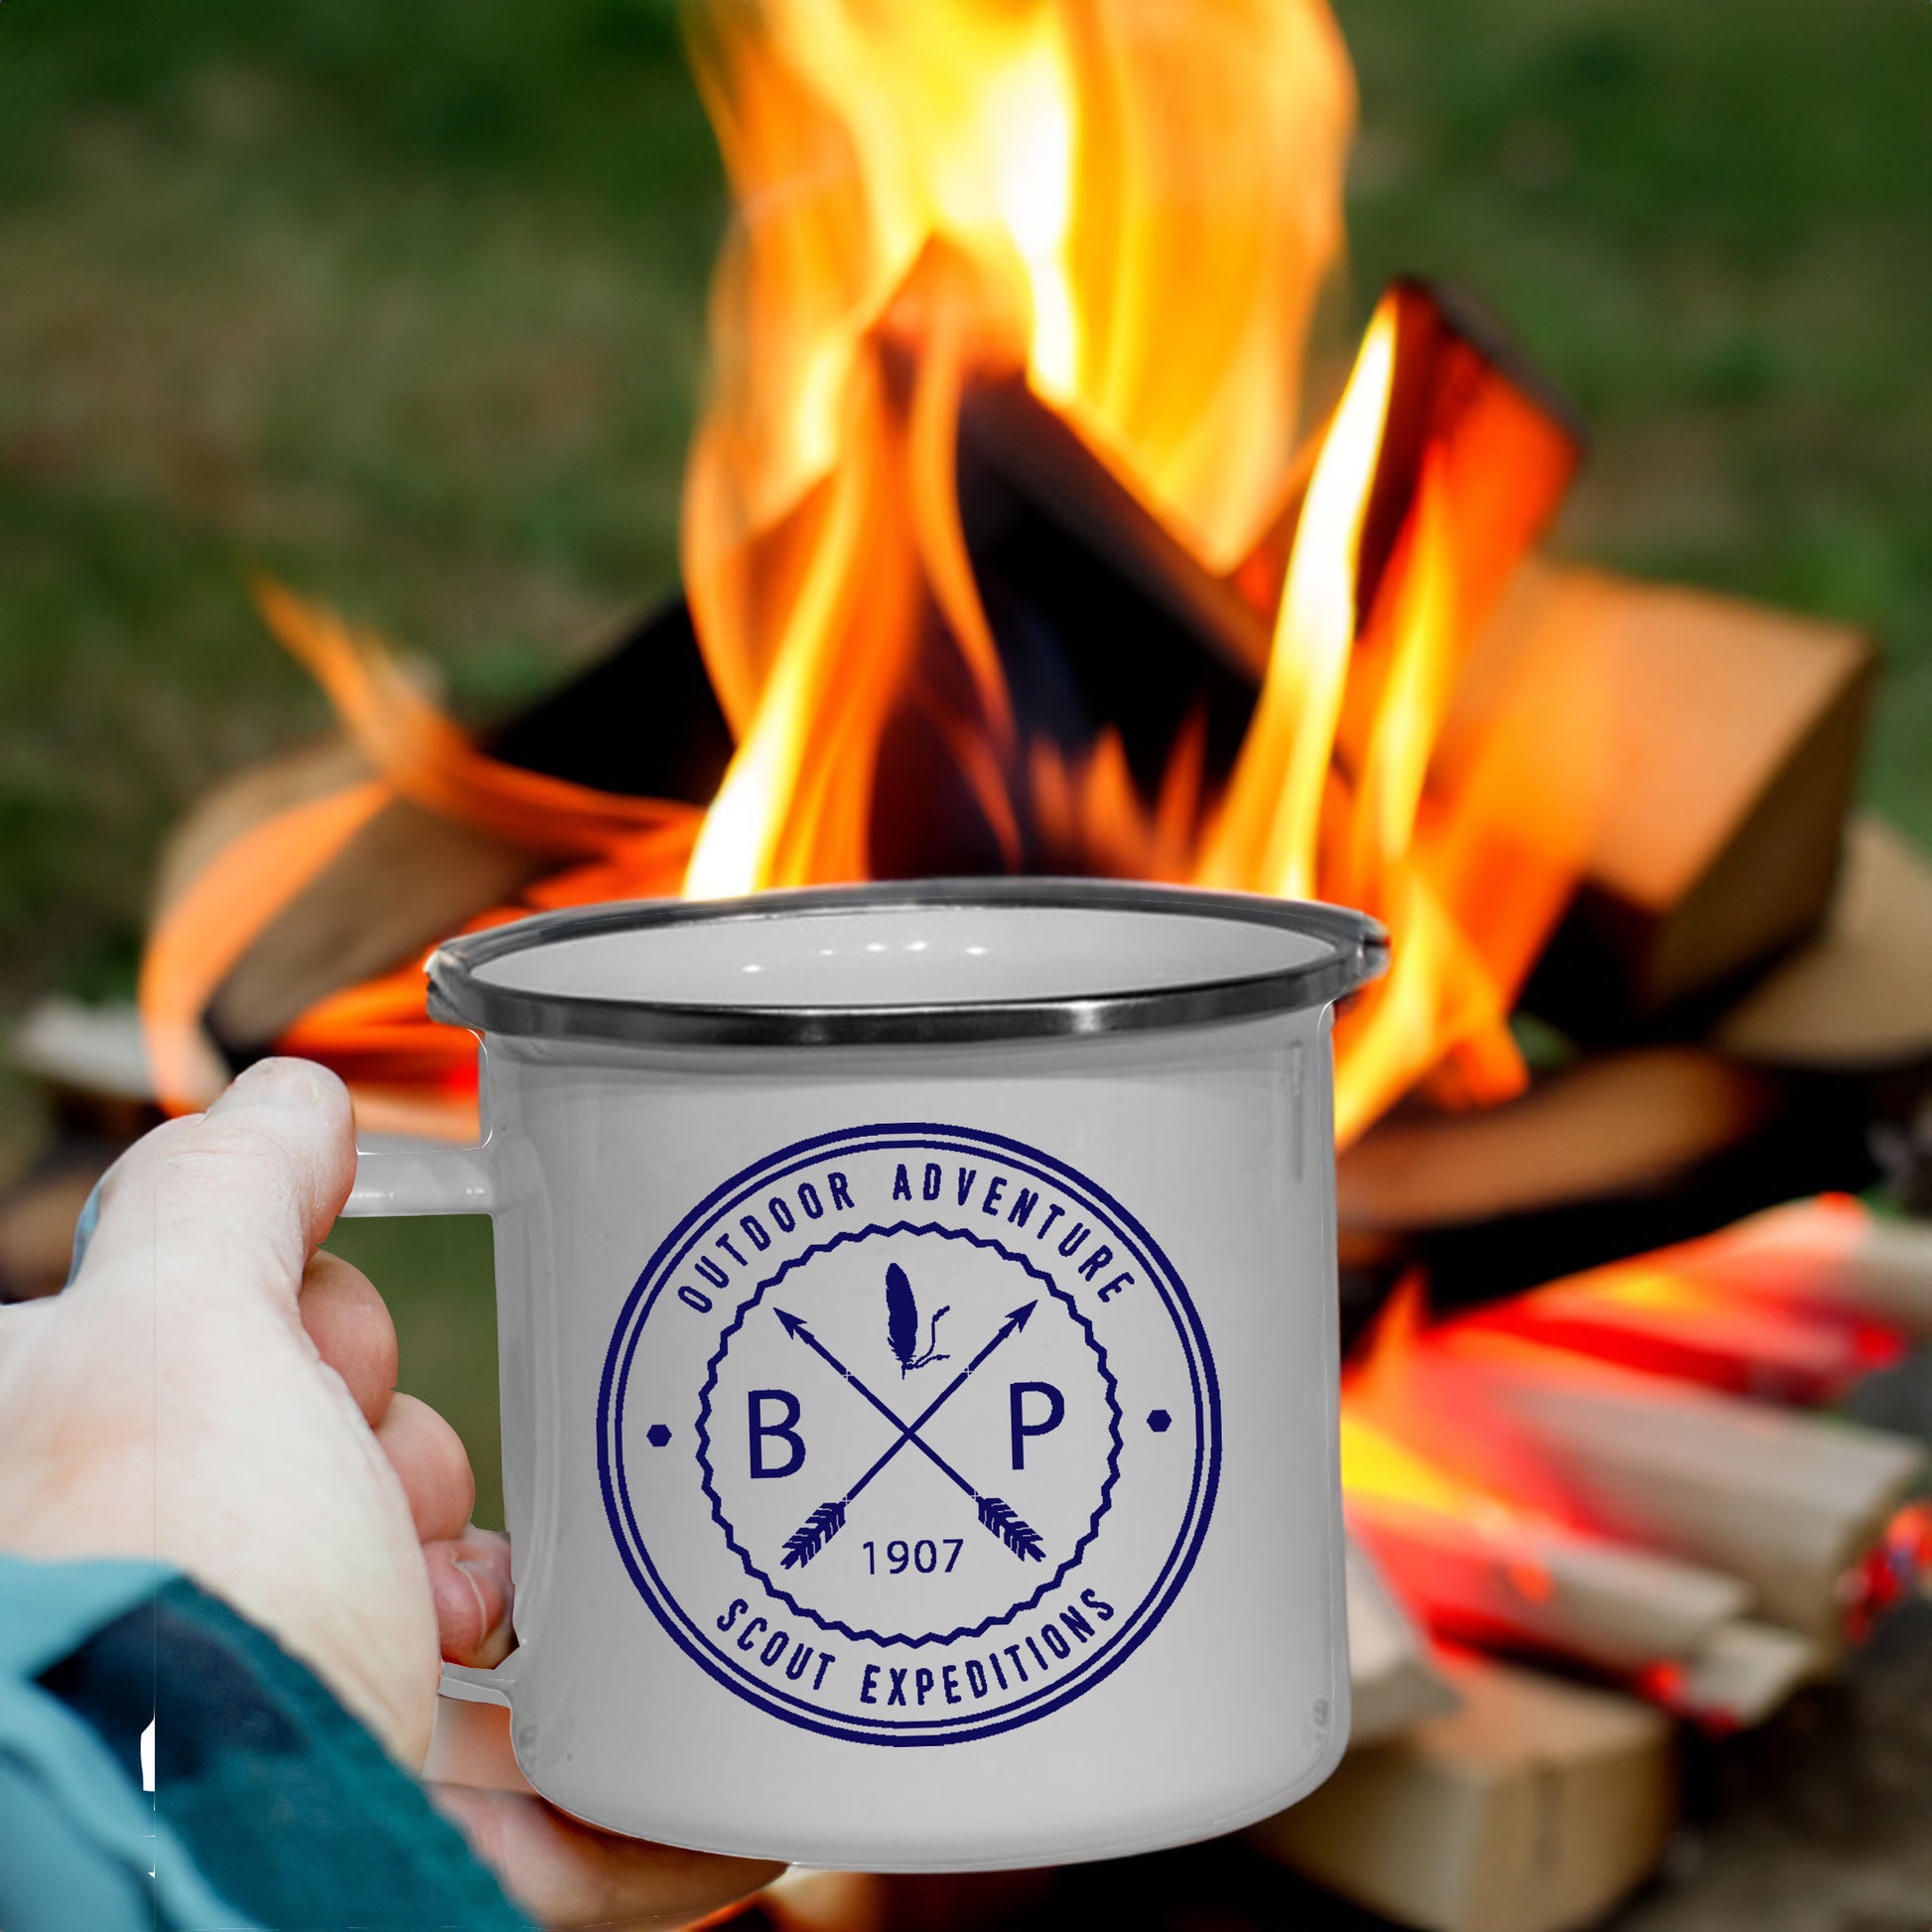 A  white enamel mug with image of BP Scouting Expeditions Since 1907